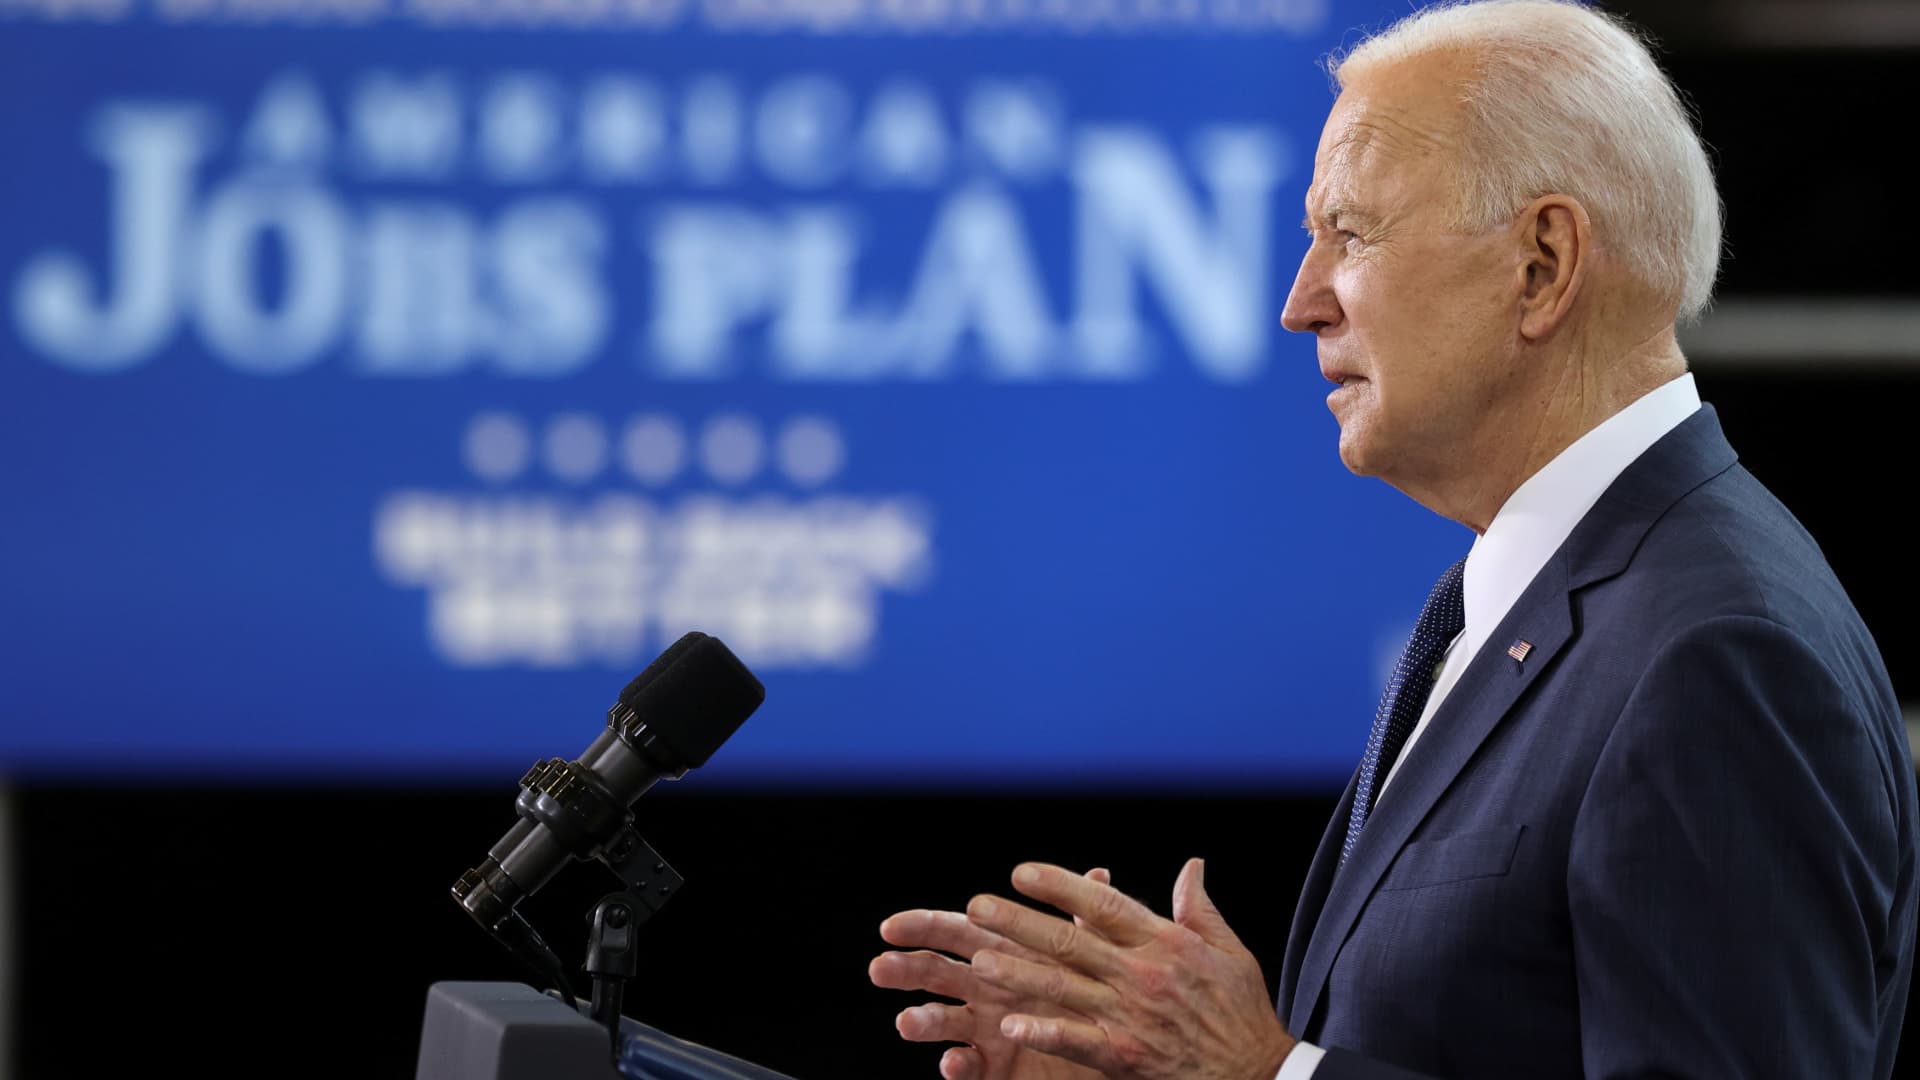 U.S. President Joe Biden speaks about his $2 trillion infrastructure plan during an event to tout the plan at Carpenters Pittsburgh Training Center in Pittsburgh, Pennsylvania, March 31, 2021.